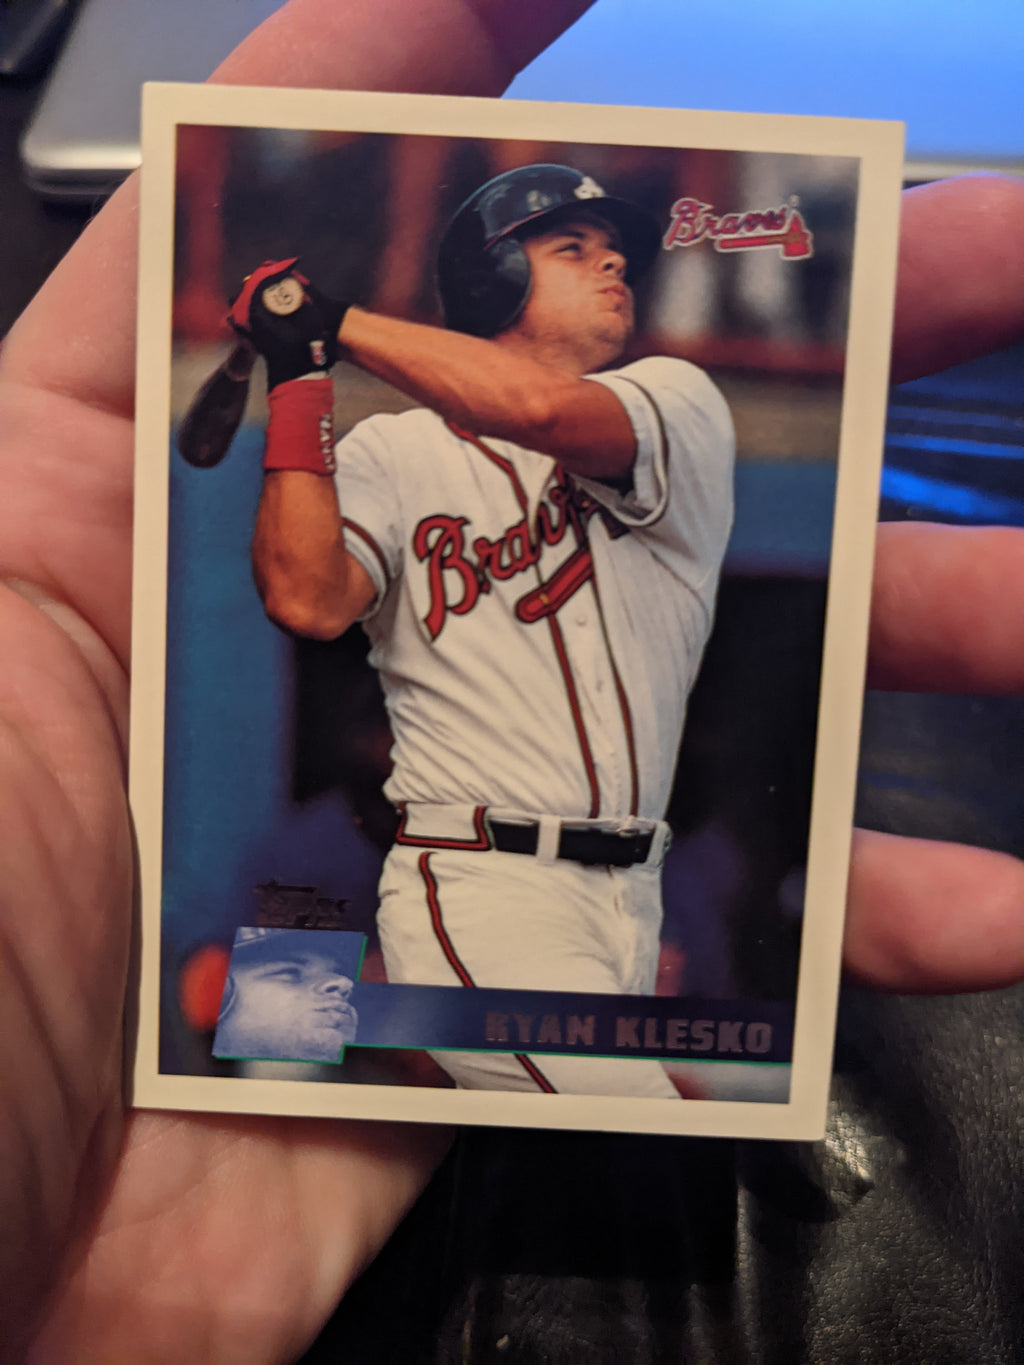 1996 Topps Baseball Cards - You Choose From List